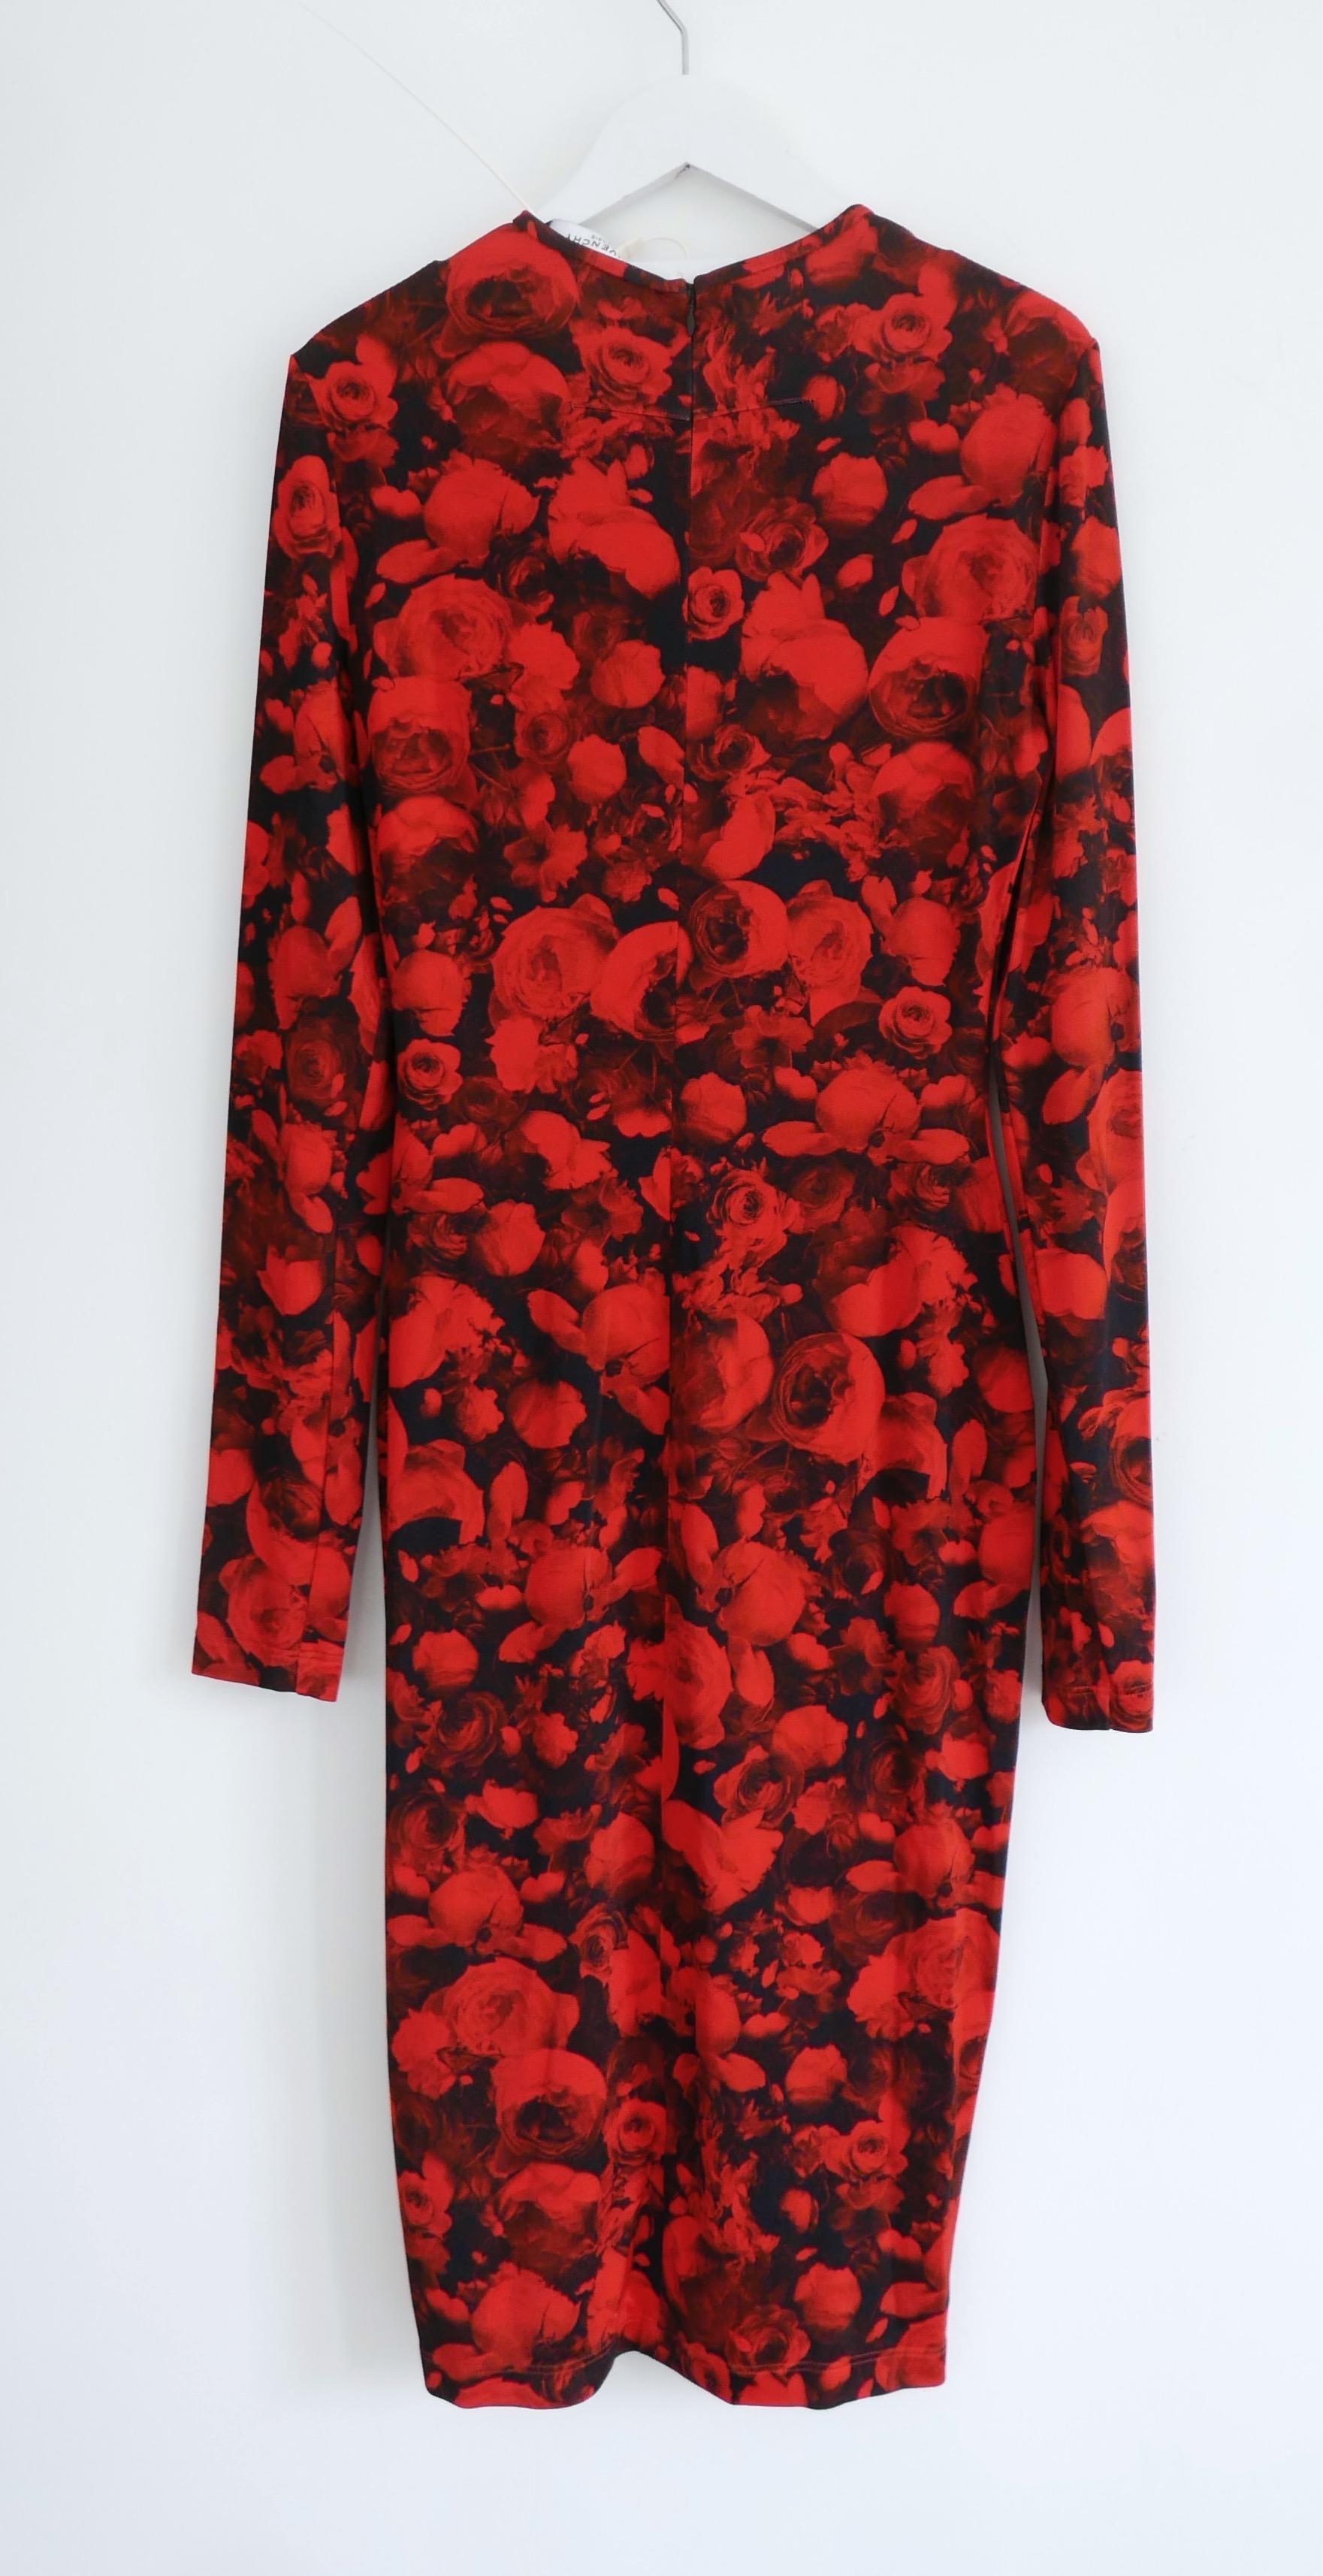 Givenchy Red Rose Print Dress In New Condition For Sale In London, GB